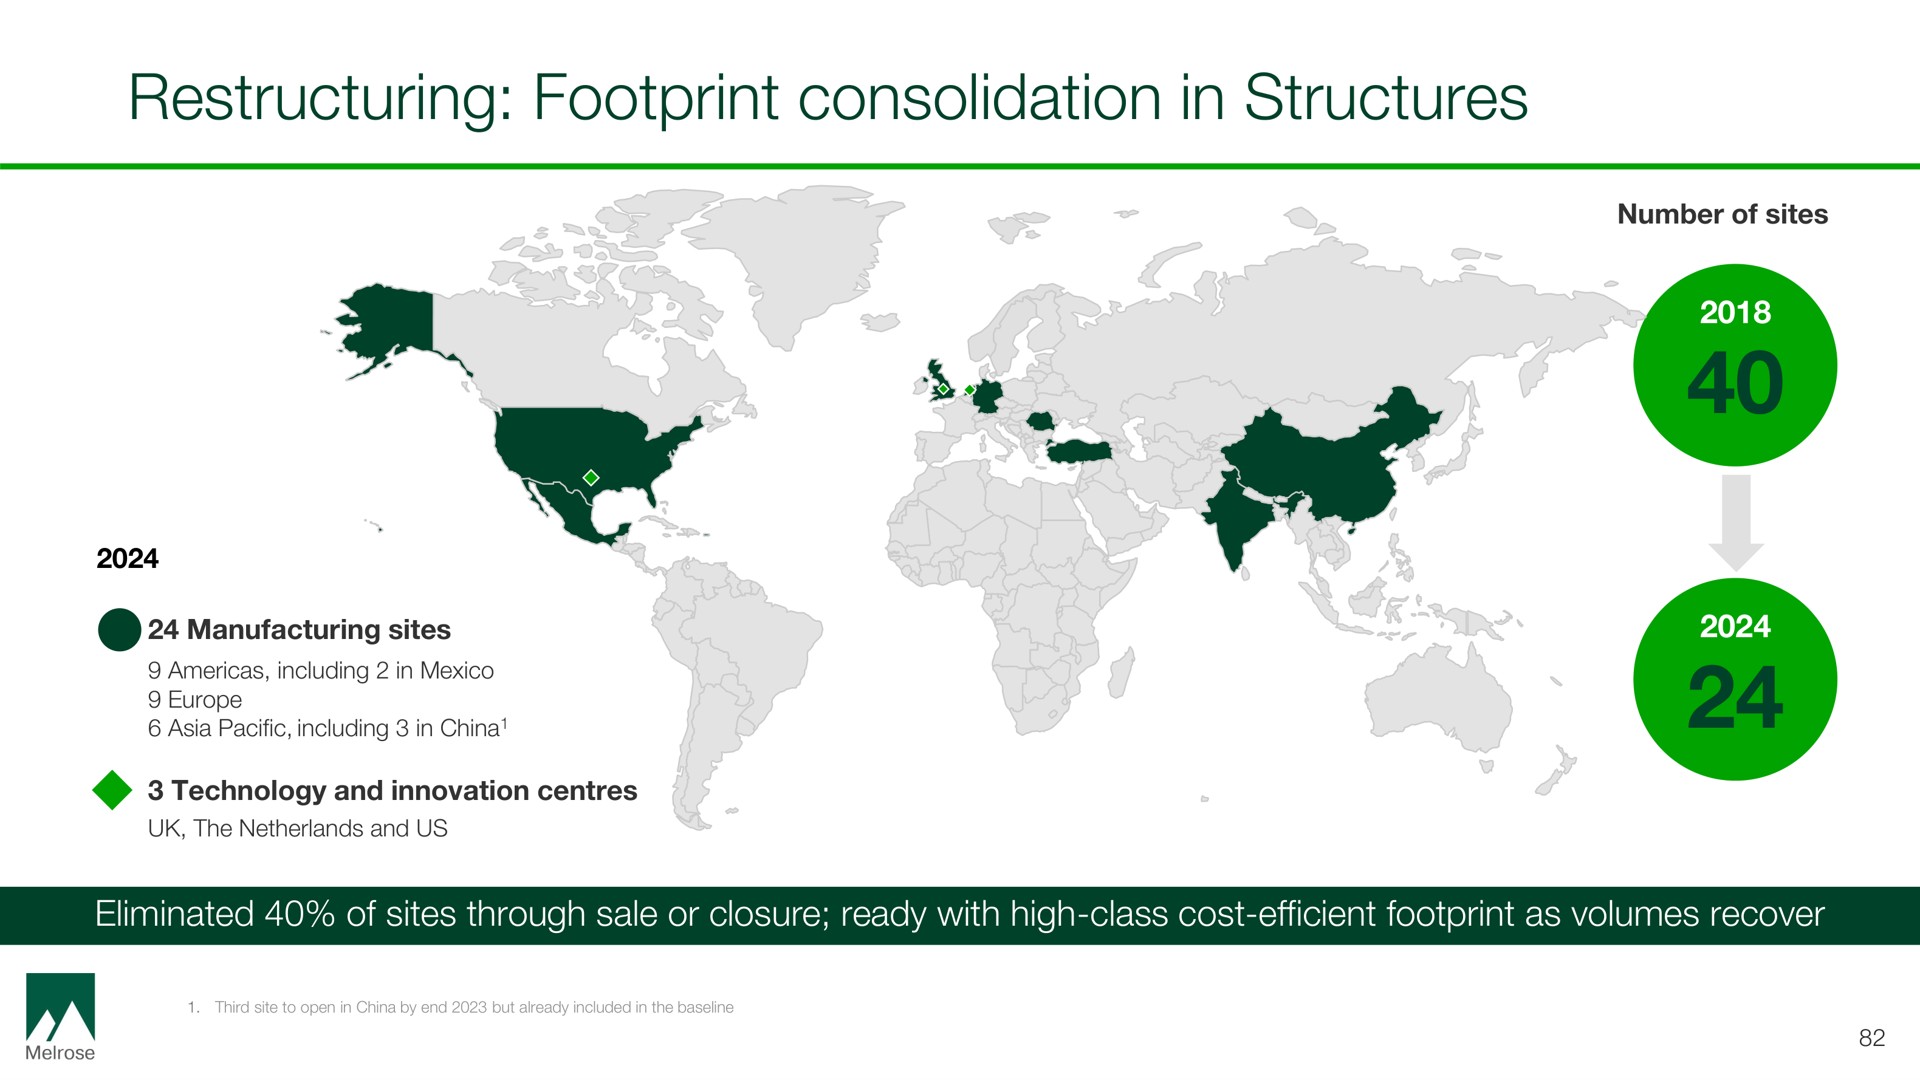 footprint consolidation in structures | Melrose